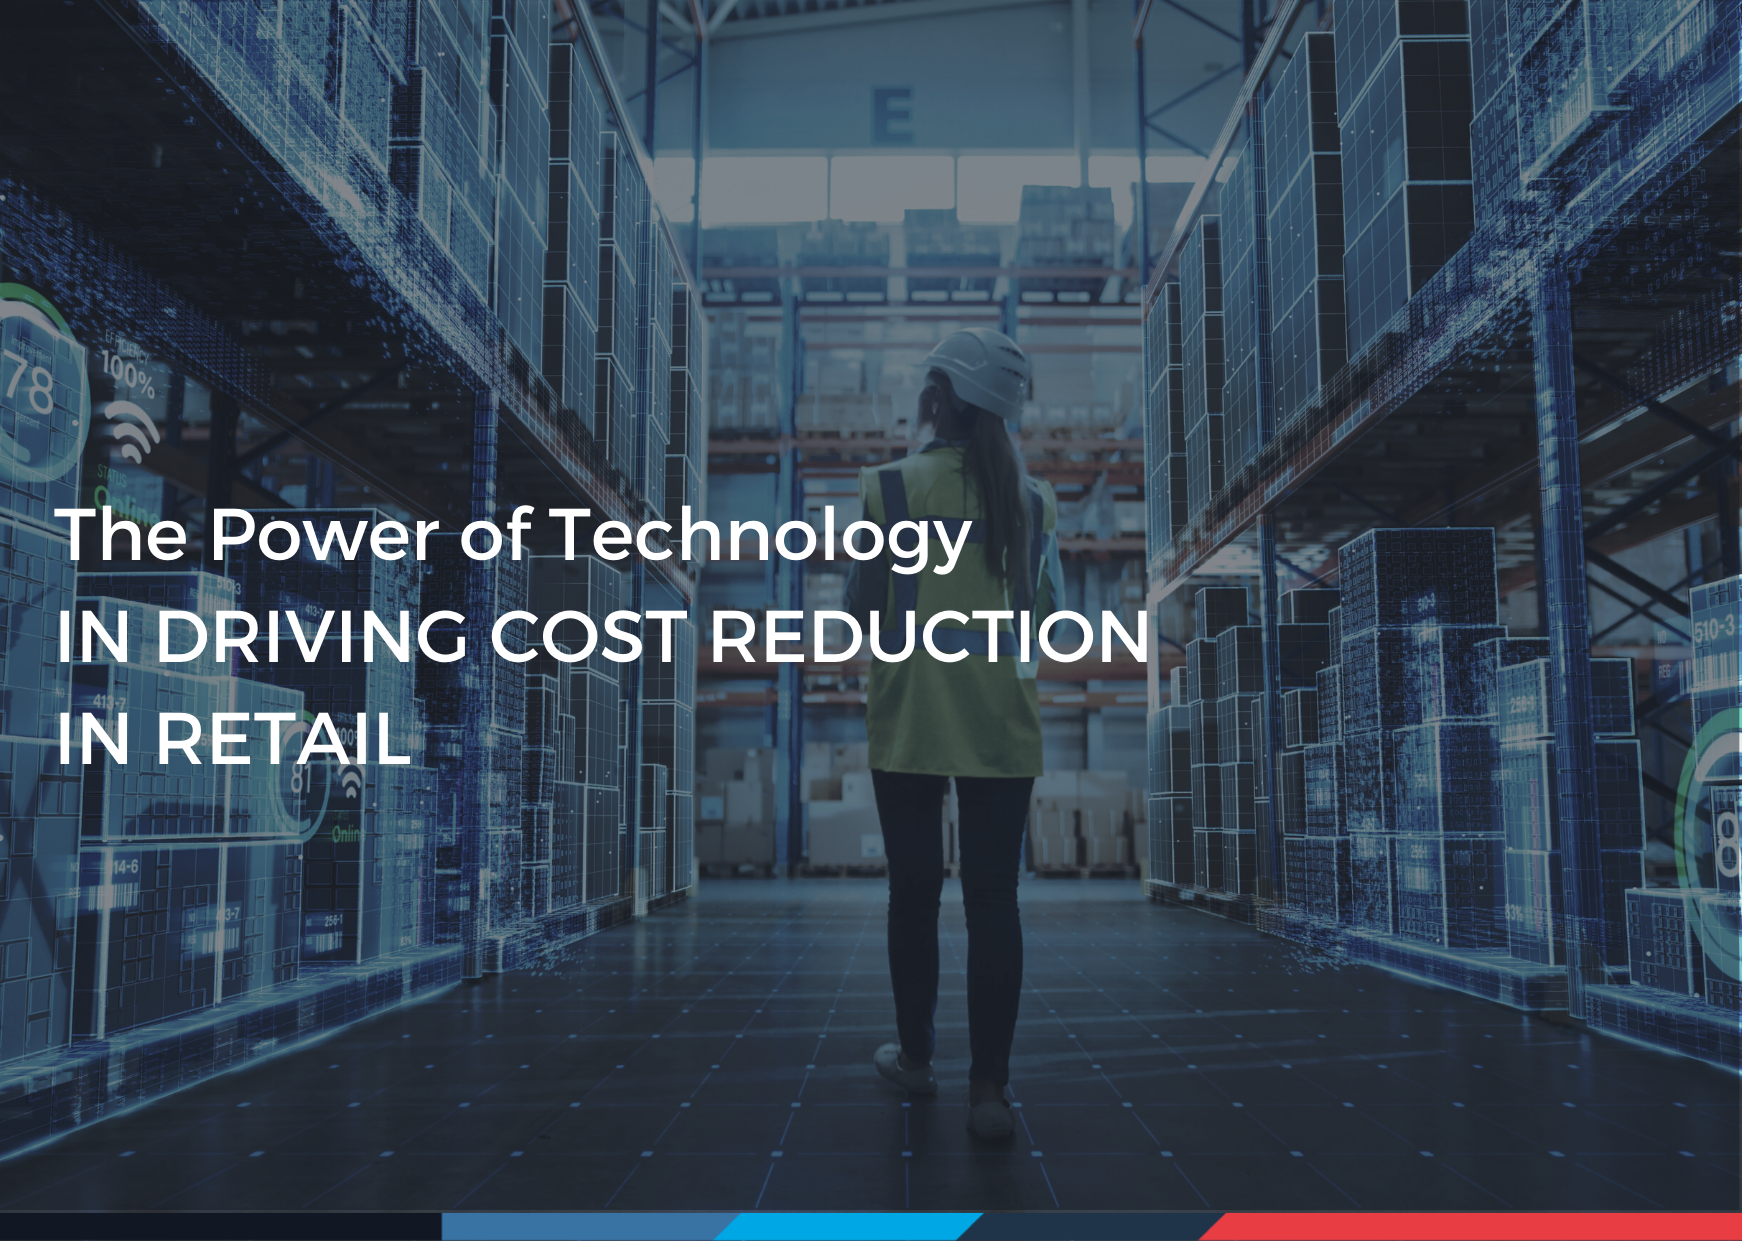 The Power of Technology in Driving Cost Reduction in Retail